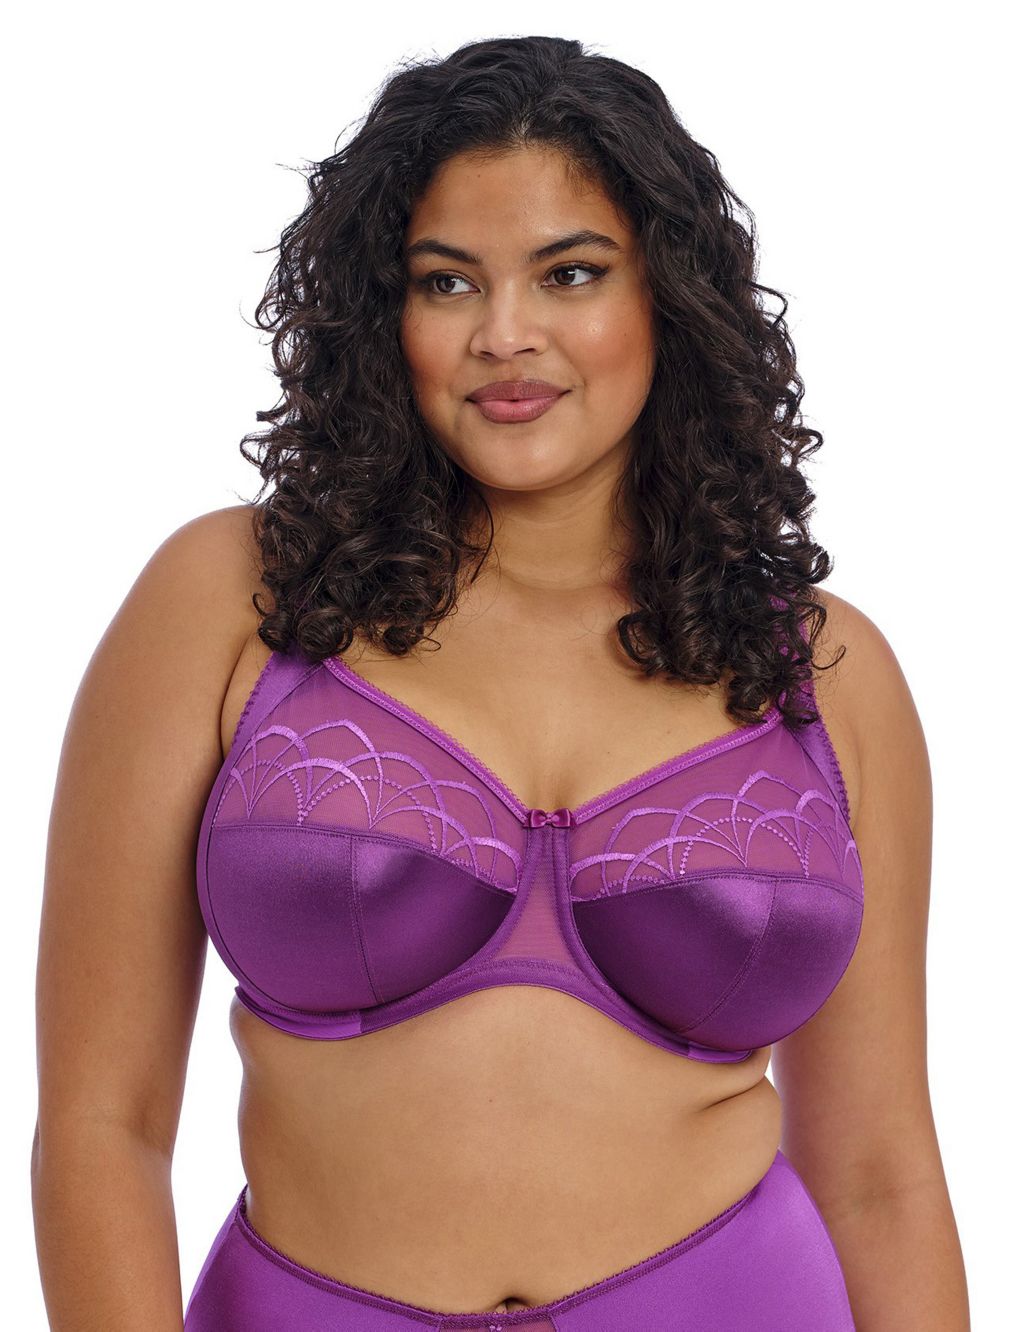 What Is The Biggest Bra Cup Size?